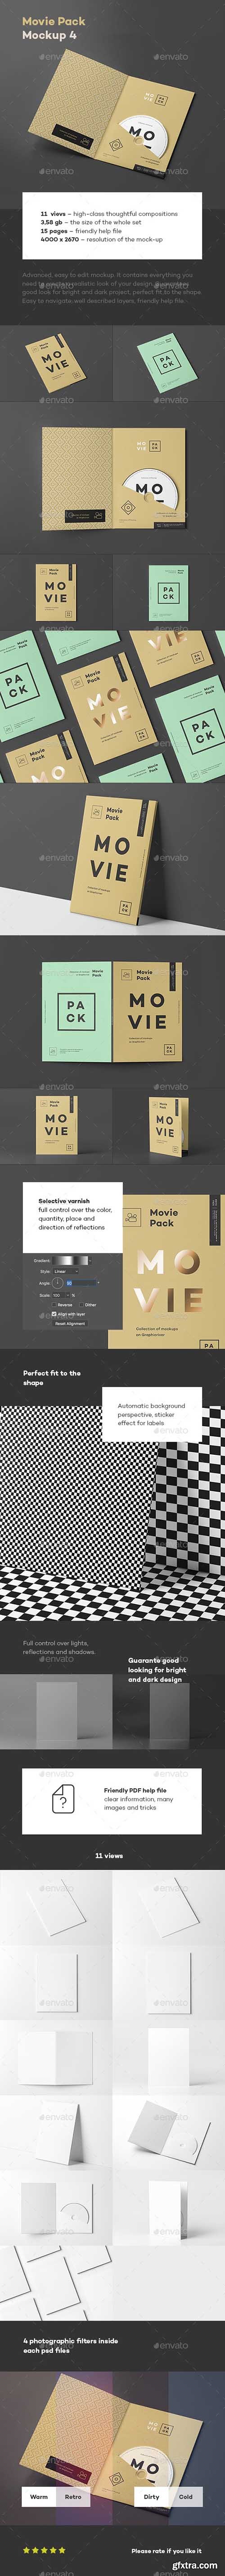 GraphicRiver - Movie Pack Mock-up 4 24379882